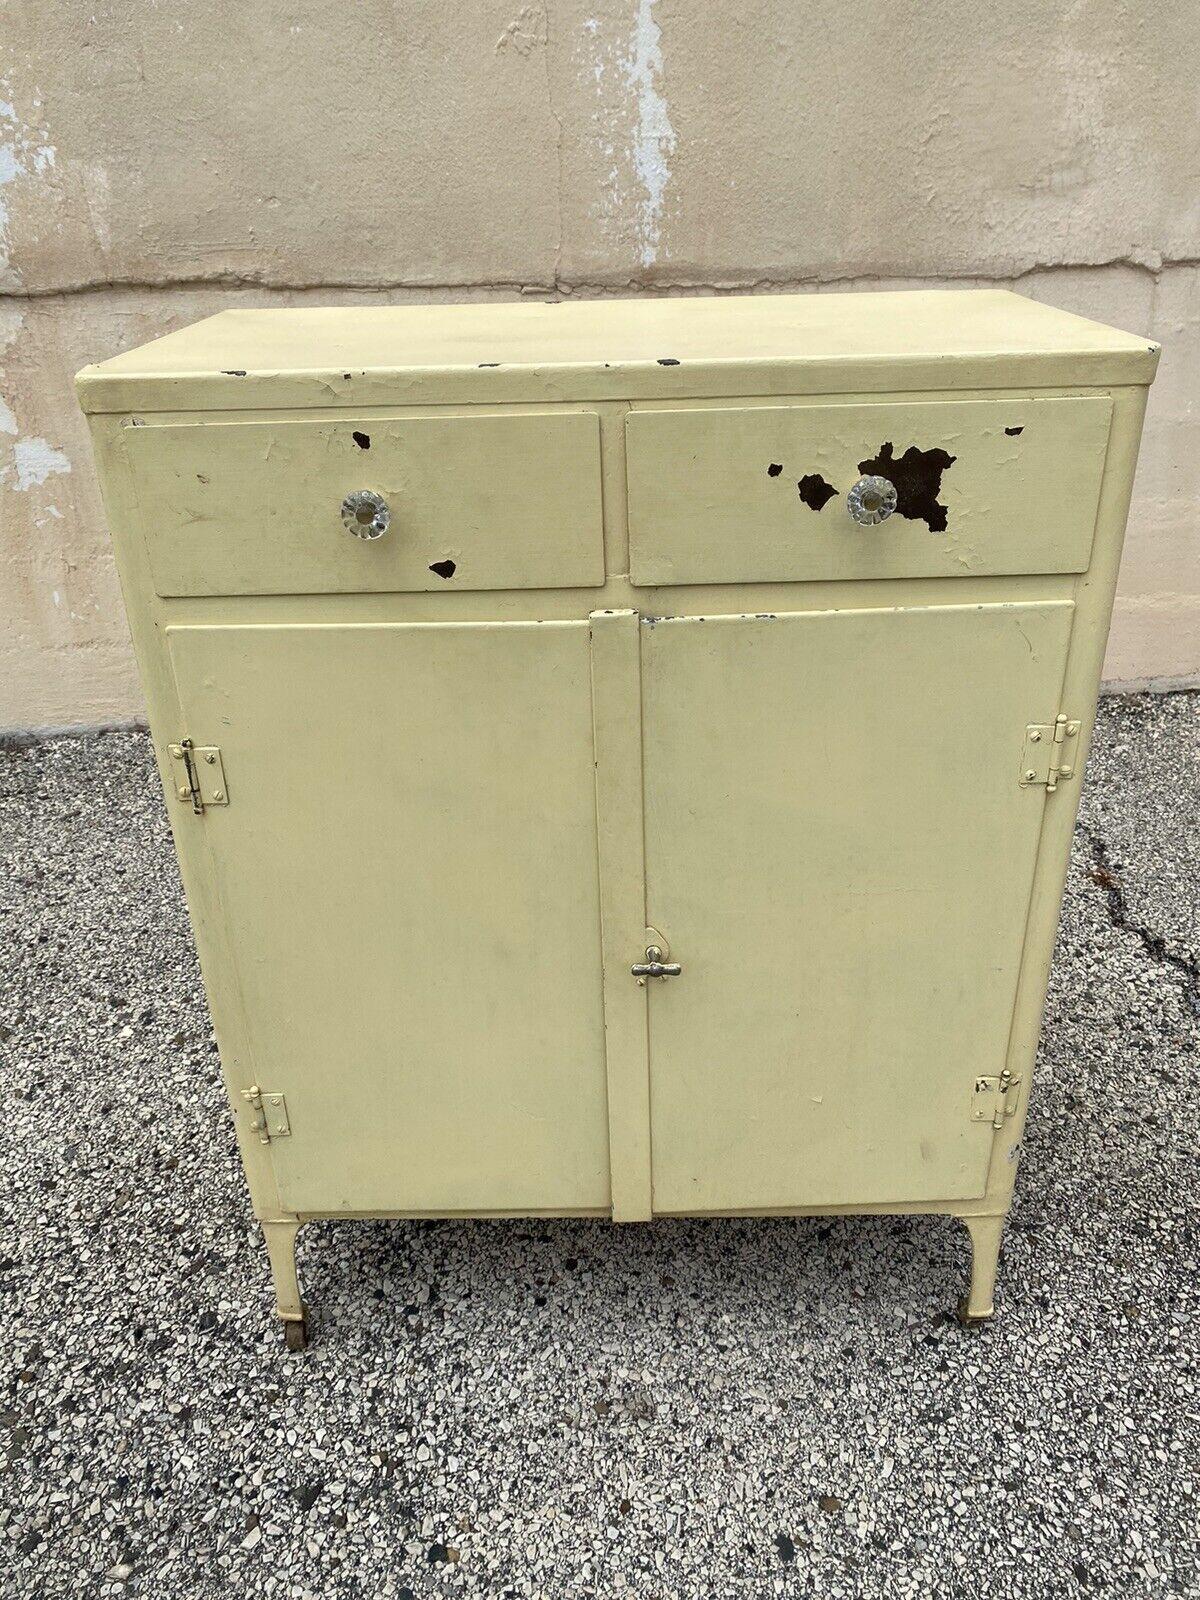 Antique American industrial steel metal yellow painted storage cabinet dresser. Item features steel metal frame, glass knob drawer pulls, 2 swing doors, 2 drawers, 1 shelf, rolling casters, distressed yellow painted finish, quality American